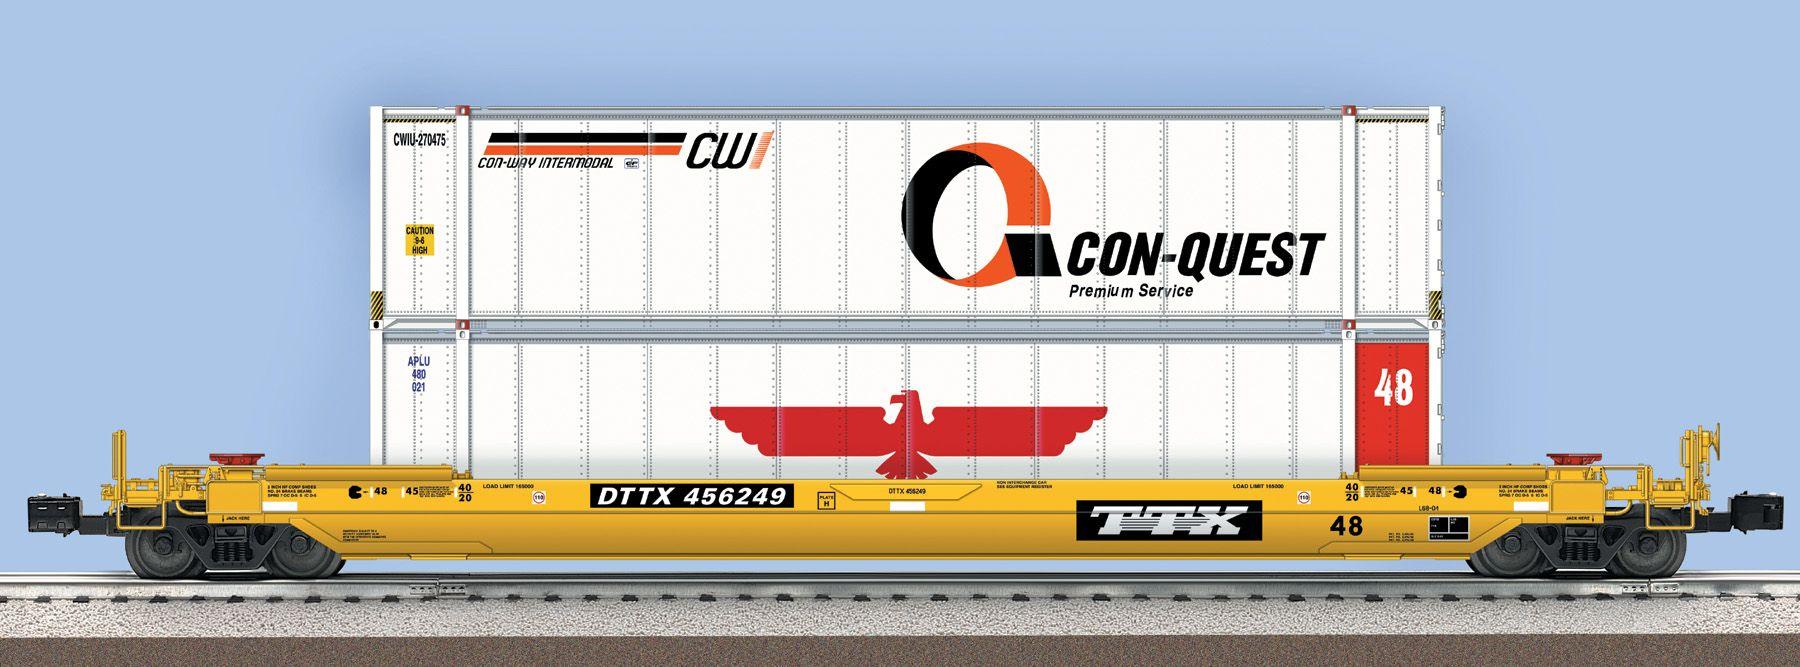 TTX Railcar Logo - Freight Car Friday – The Many Faces of Trailer Train | Lionel Trains